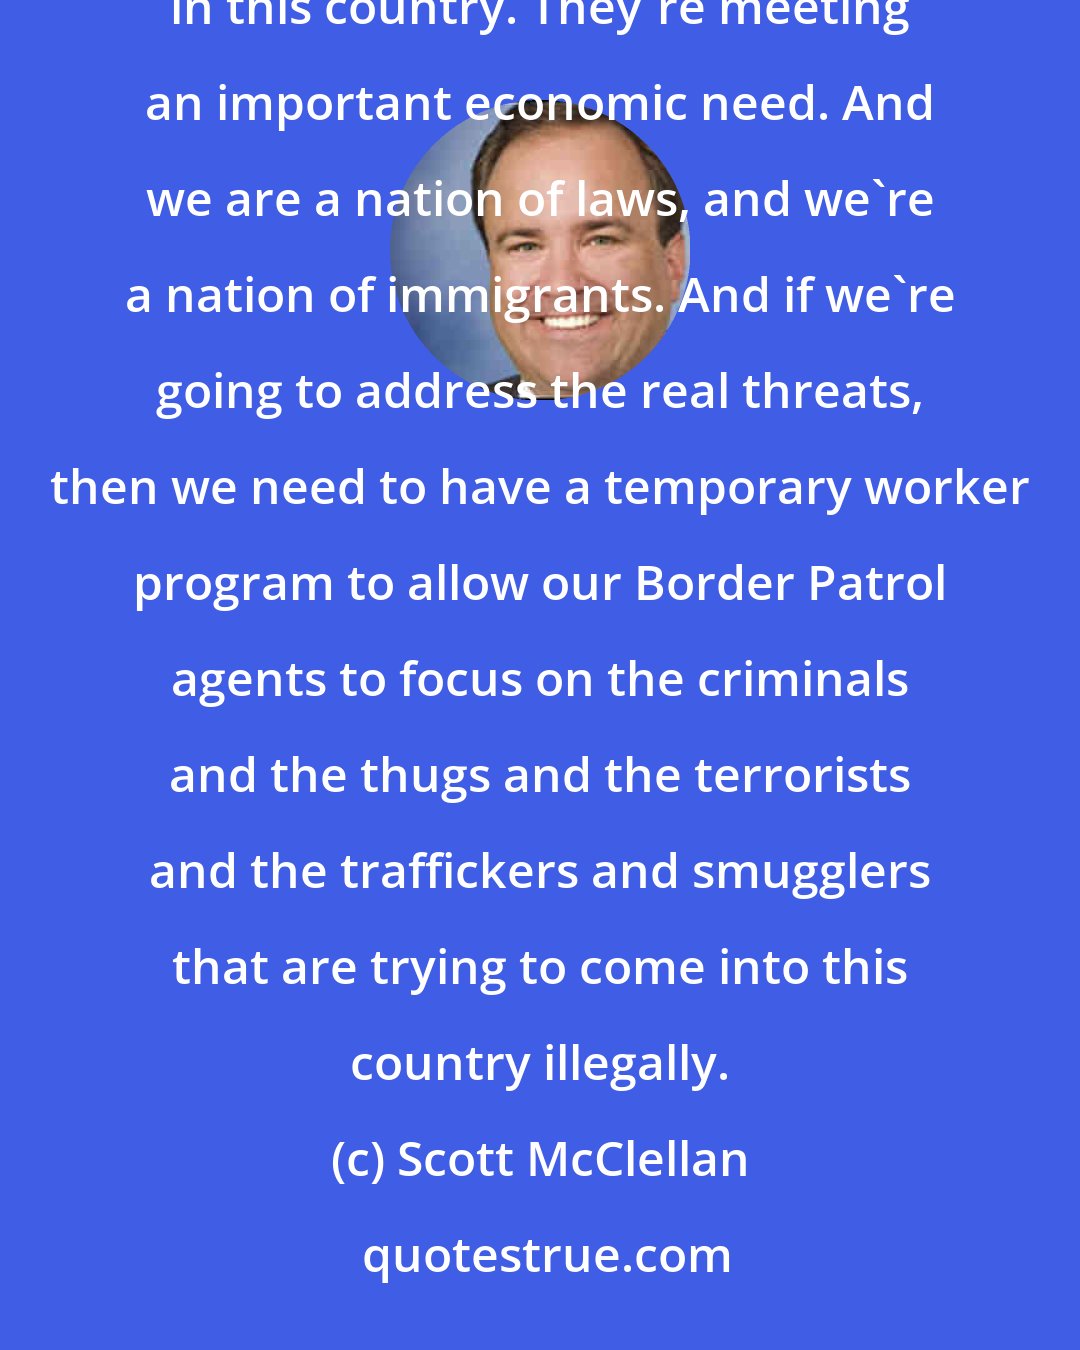 Scott McClellan: We have to deal with reality. The reality is, we have a number a very high number of illegal immigrants in this country. They're meeting an important economic need. And we are a nation of laws, and we're a nation of immigrants. And if we're going to address the real threats, then we need to have a temporary worker program to allow our Border Patrol agents to focus on the criminals and the thugs and the terrorists and the traffickers and smugglers that are trying to come into this country illegally.